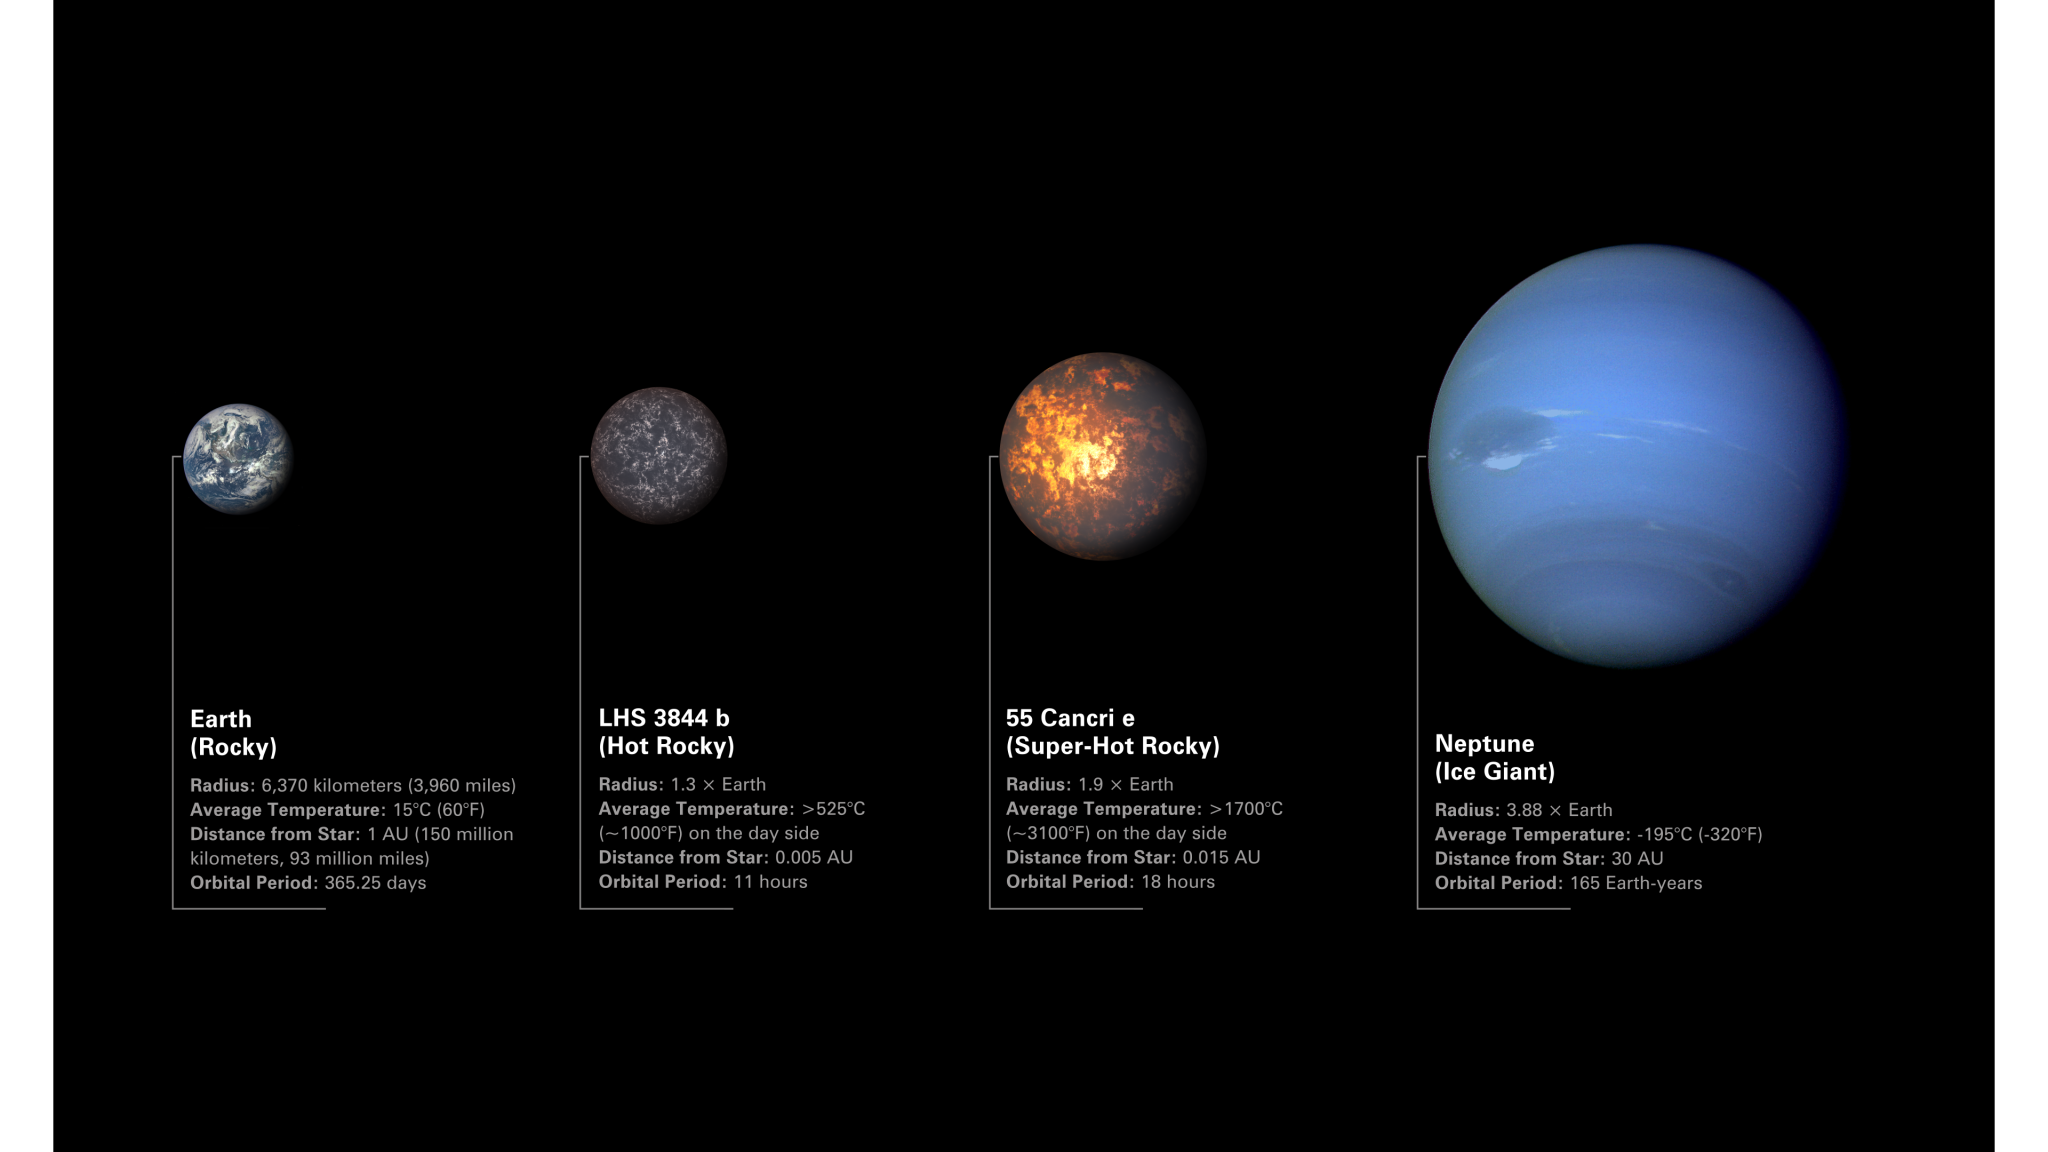 Illustration comparing rocky exoplanets LHS 3844 b and 55 Cancri e to Earth and Neptune. The planets are arranged from left to right in order of increasing radius.